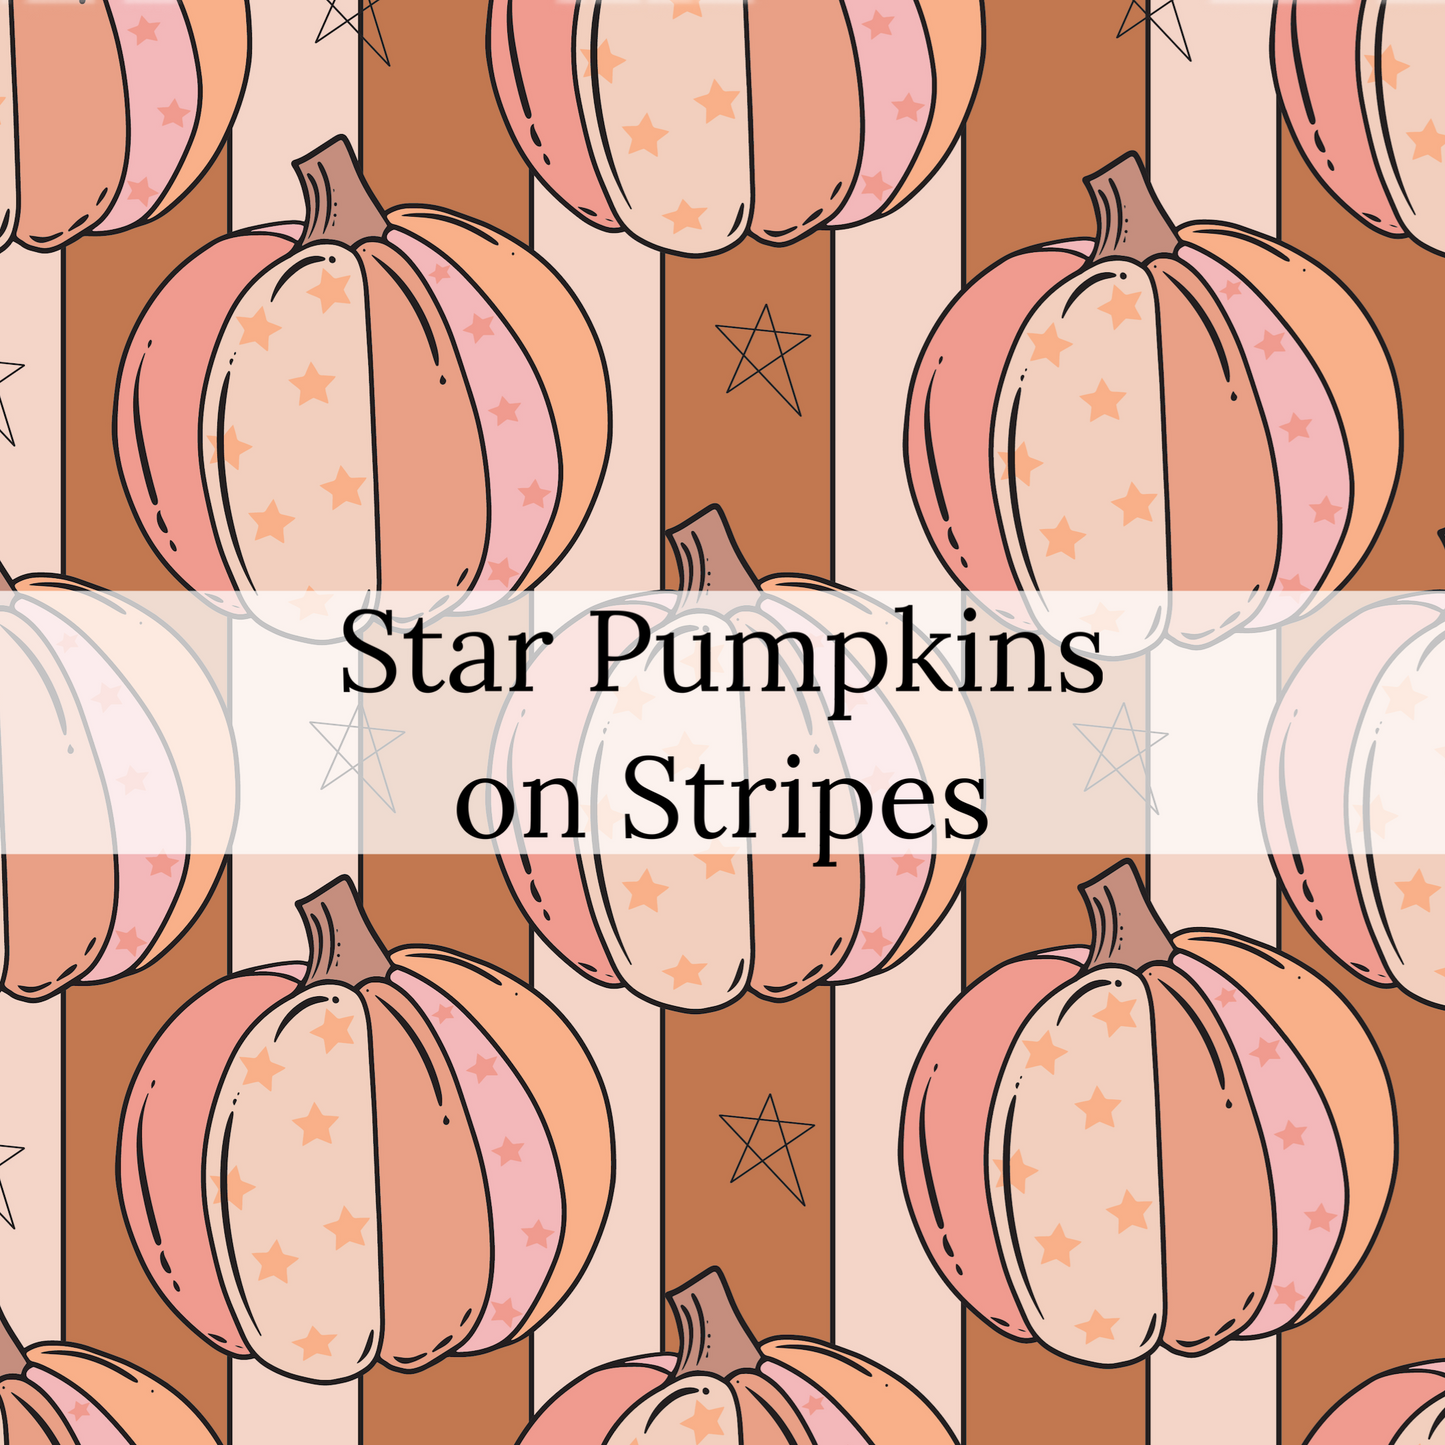 Vintage Trick or Treat #2 Strip Collection | The Peachy Dot | Liverpool Bullet Fabric